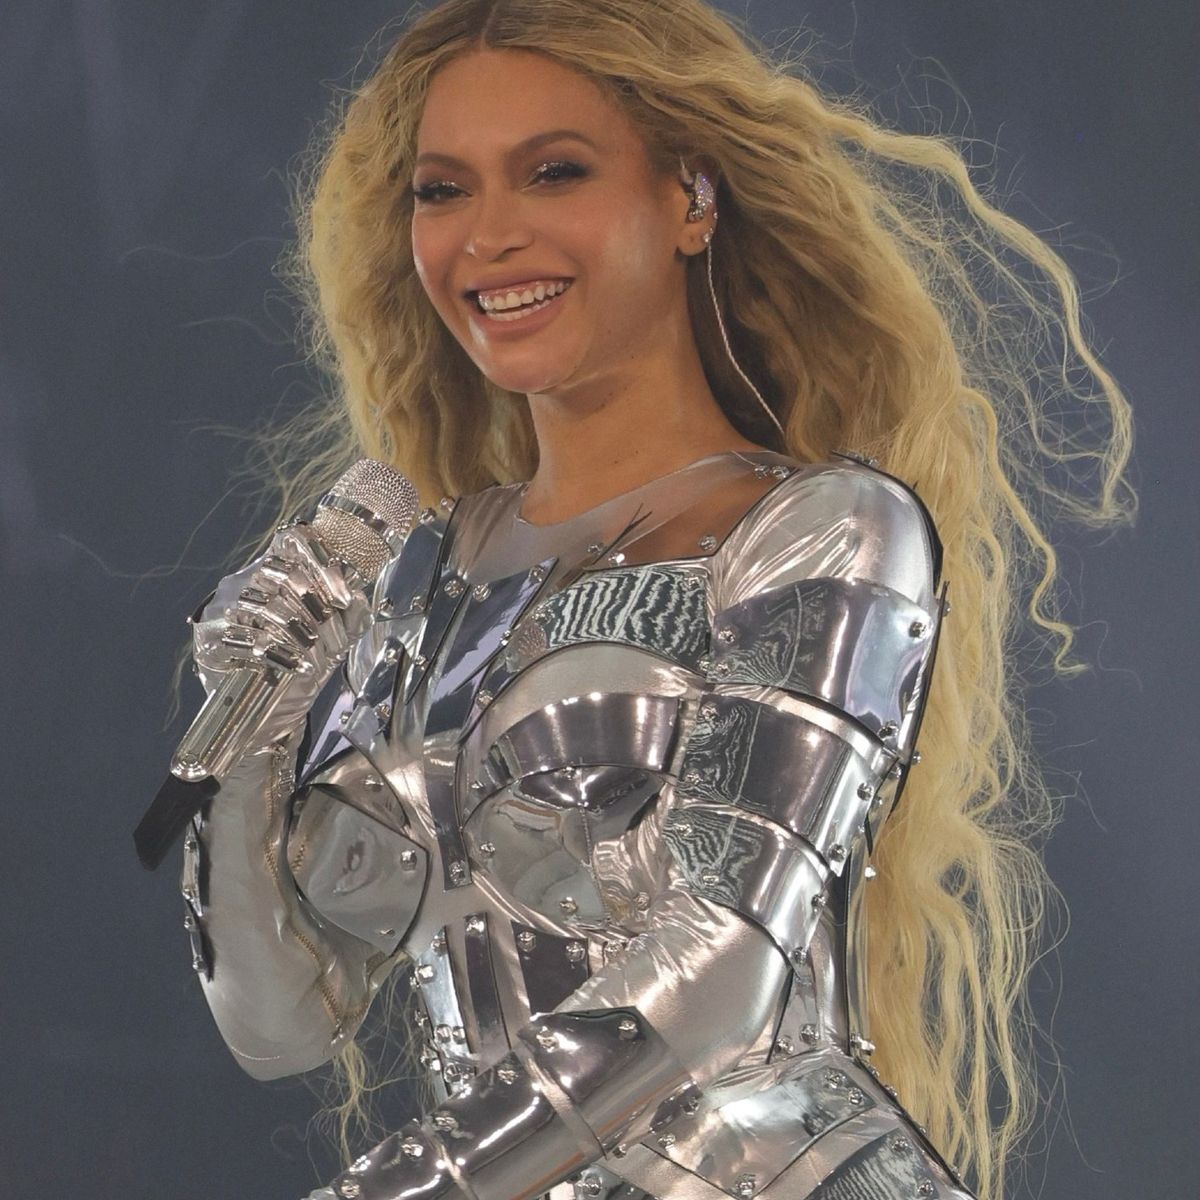 You'd Be Smiling Too If You Made As Much Money As Beyoncé Did This Weekend